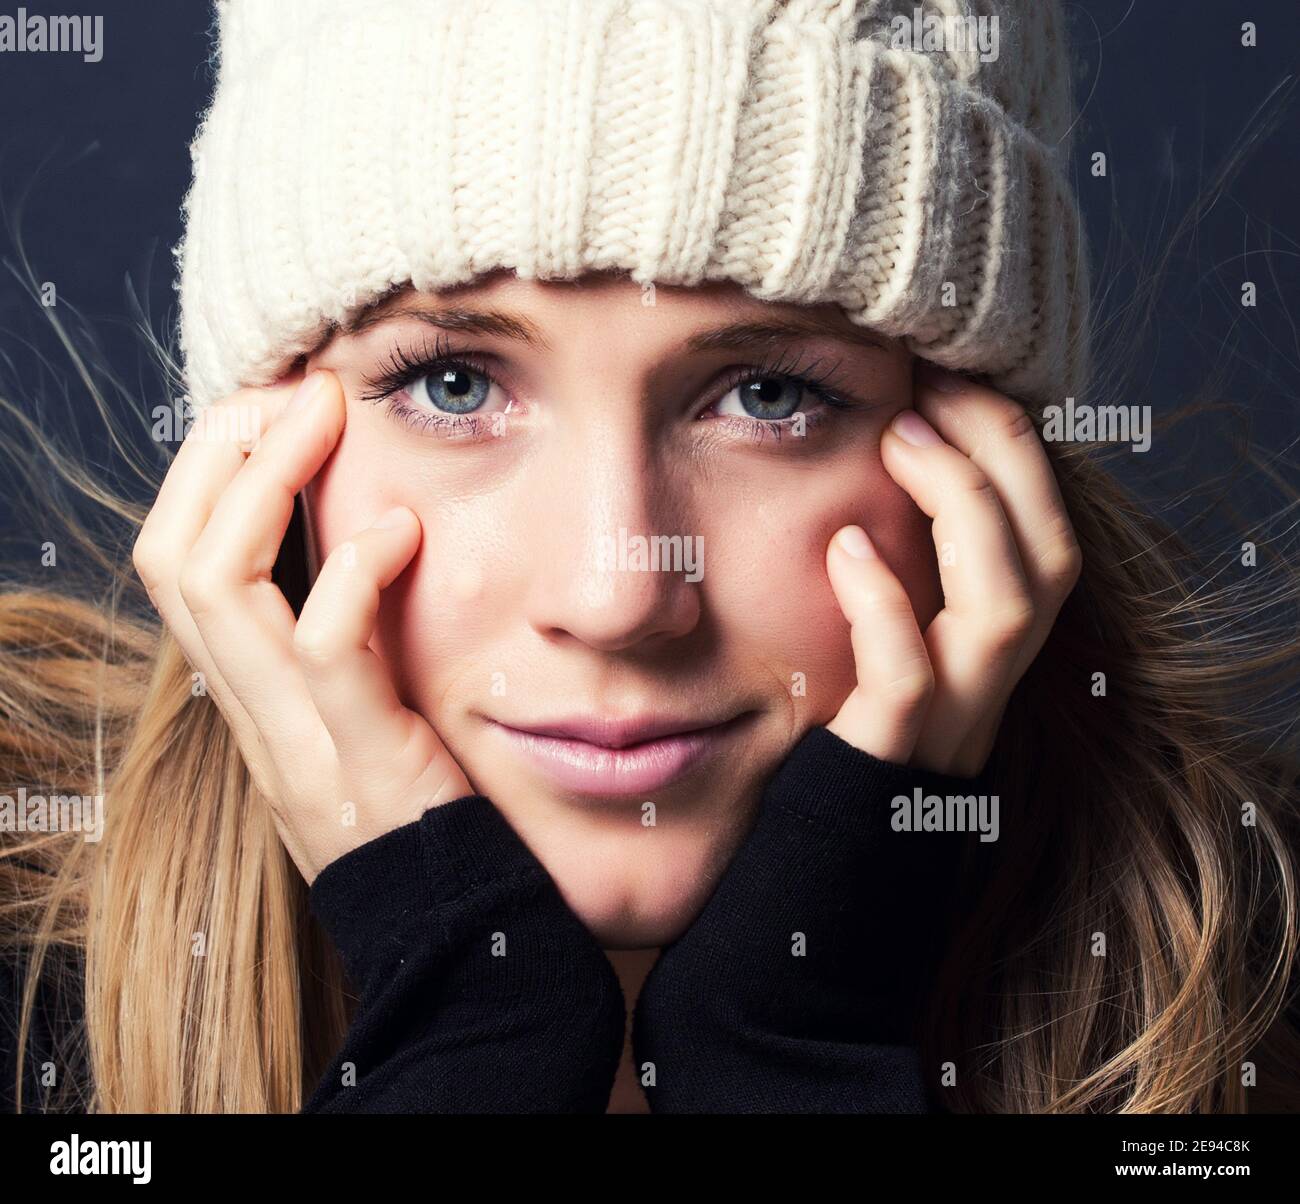 YOUNG WOMAN PORTRAIT PHOTOGRAPHY WITH WHITE CAP Stock Photo